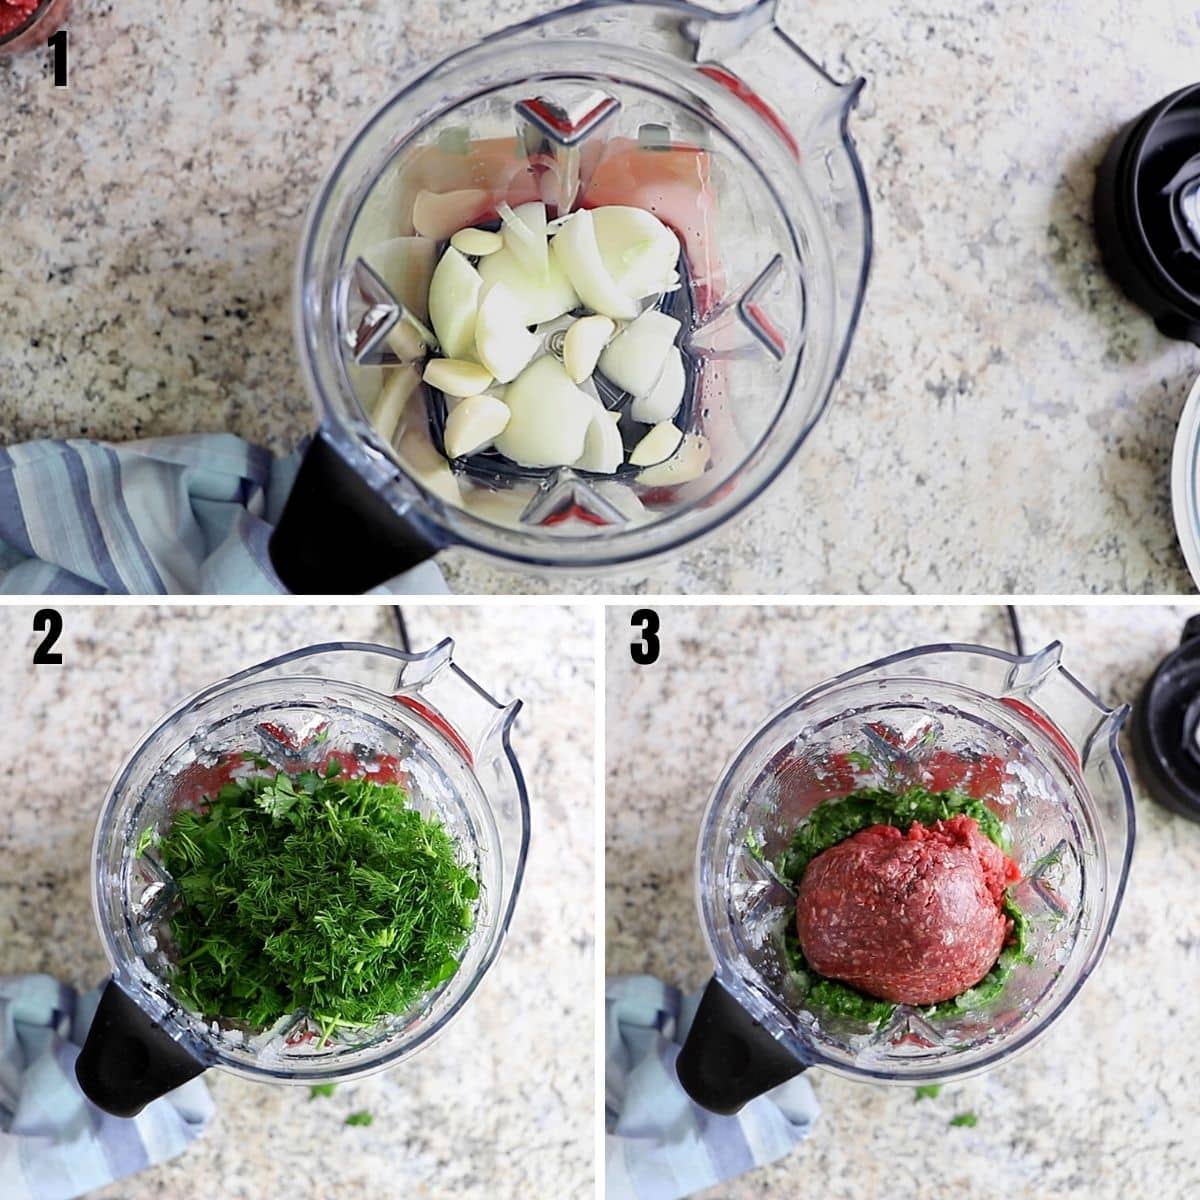 A collage of three images showing how to blend the meat mixture for gluten free meatballs.